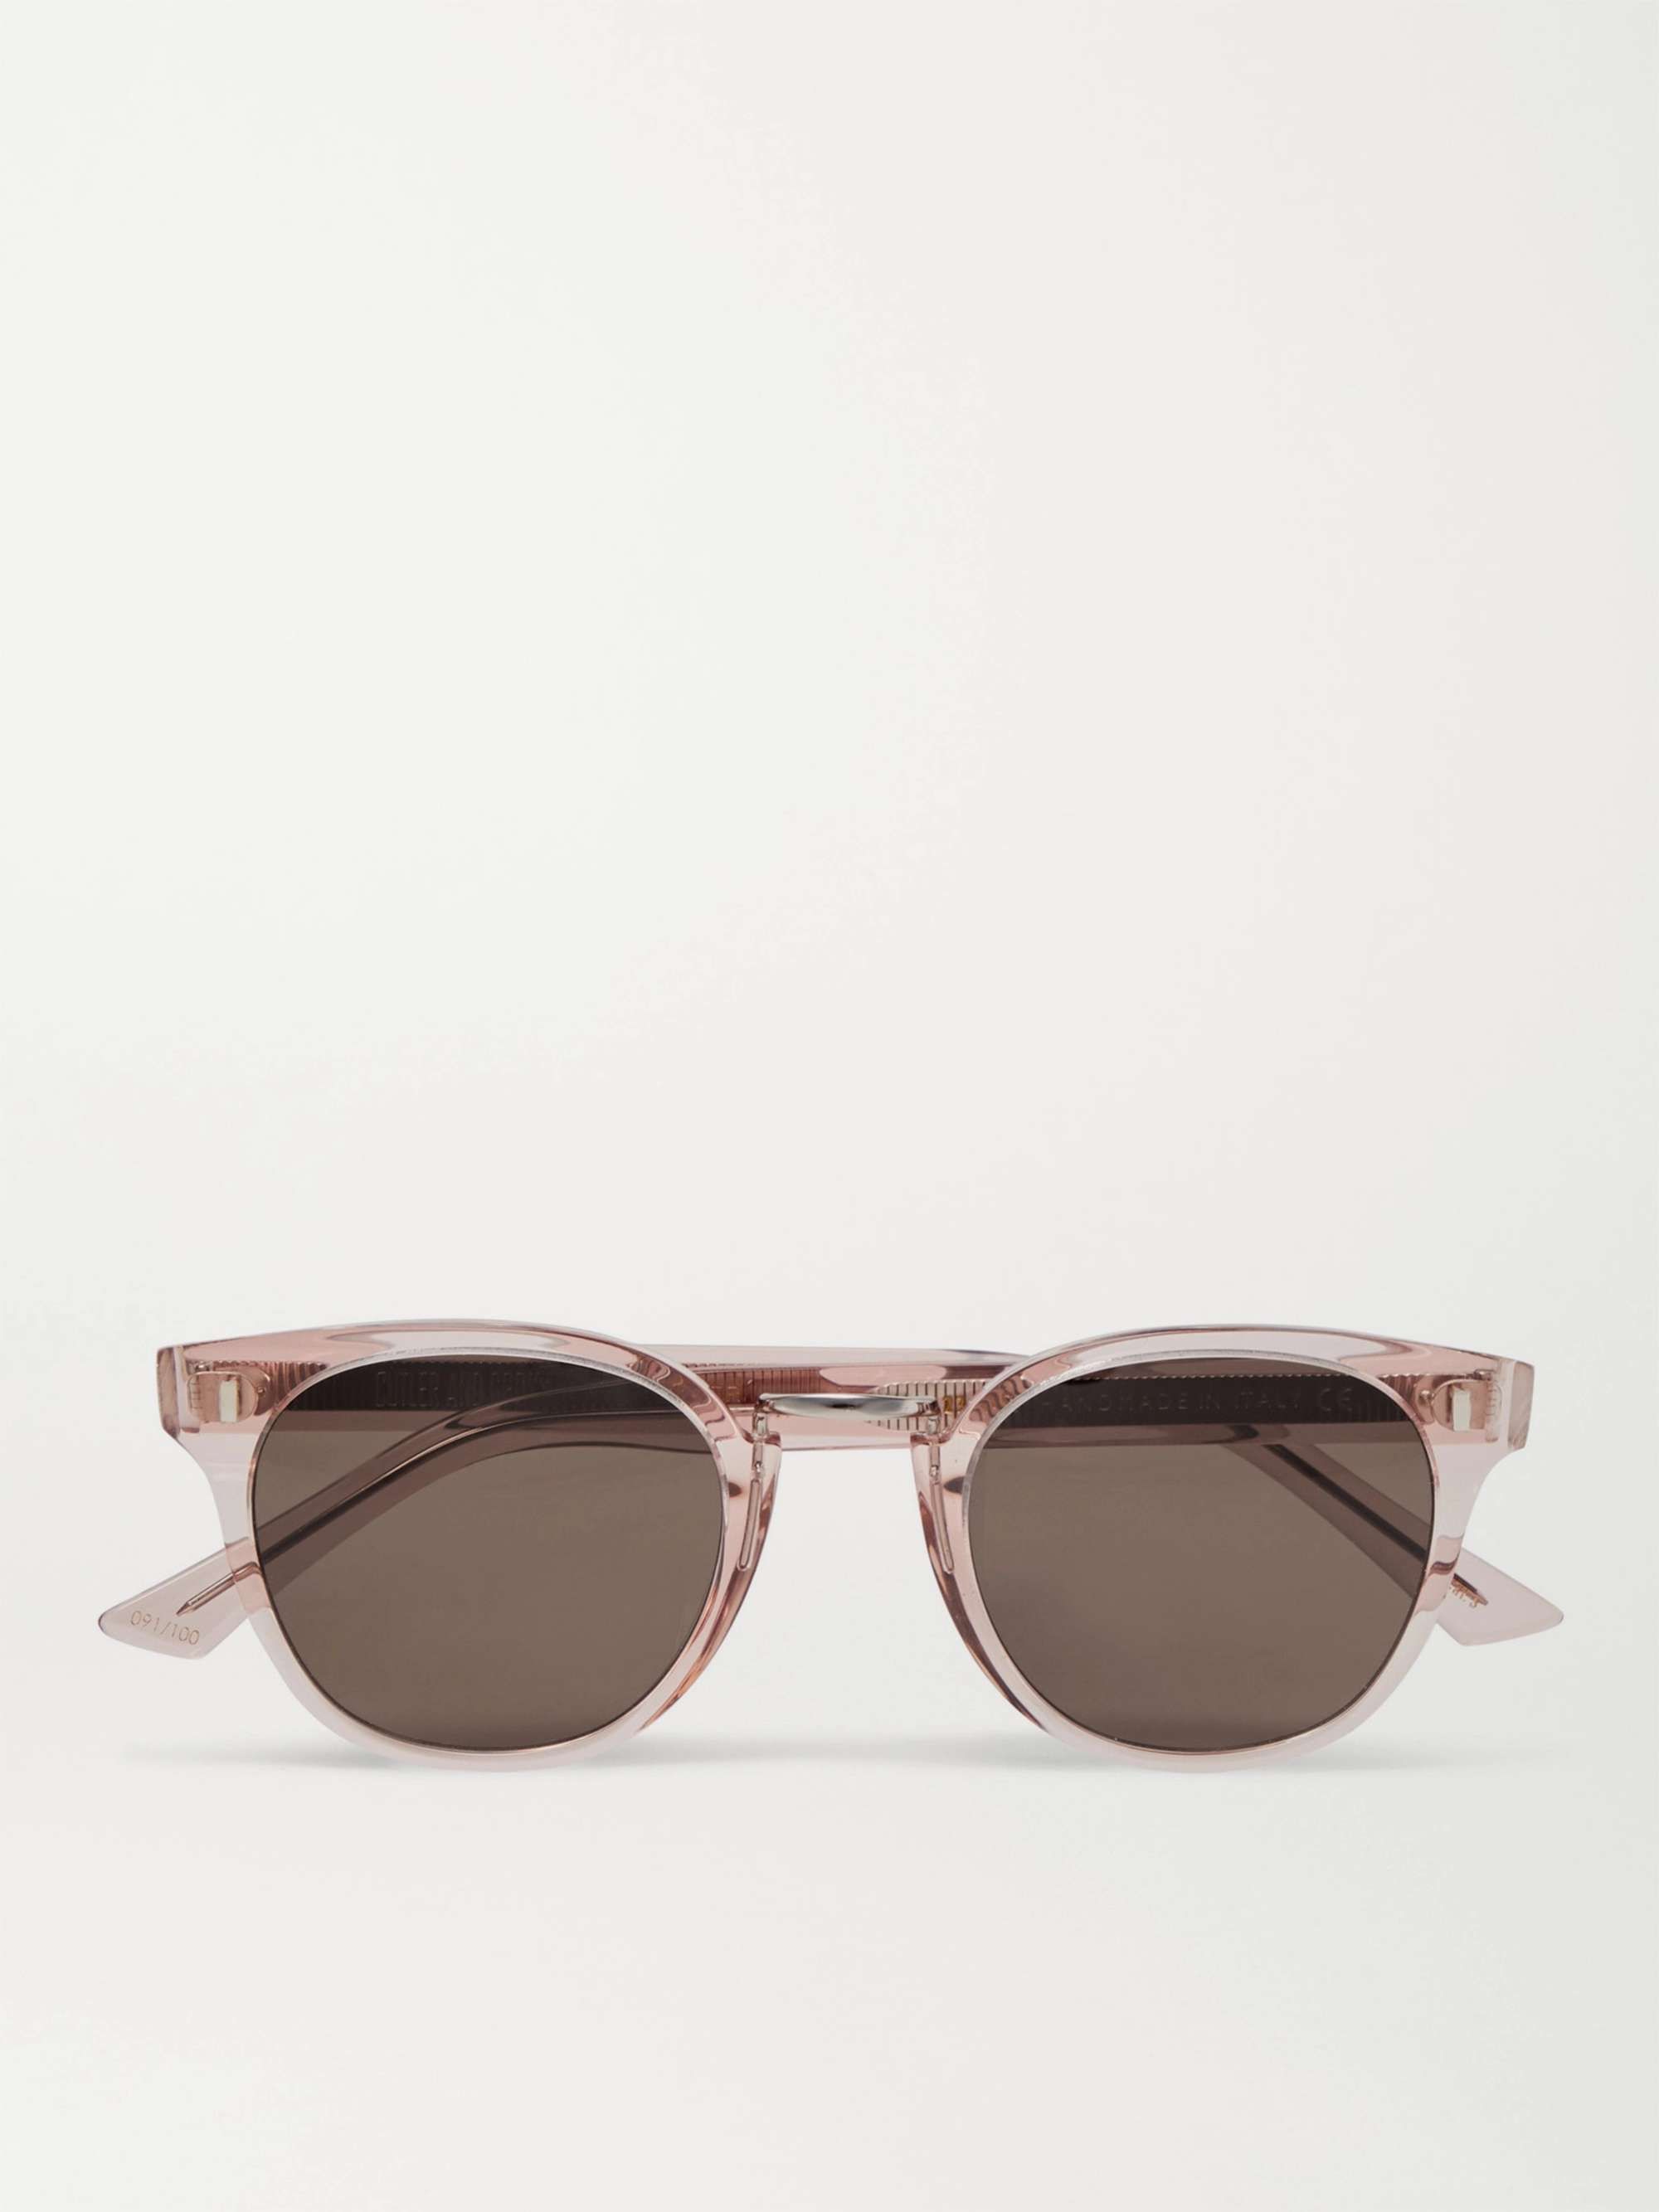 CUTLER AND GROSS Round Frame Acetate Sunglasses